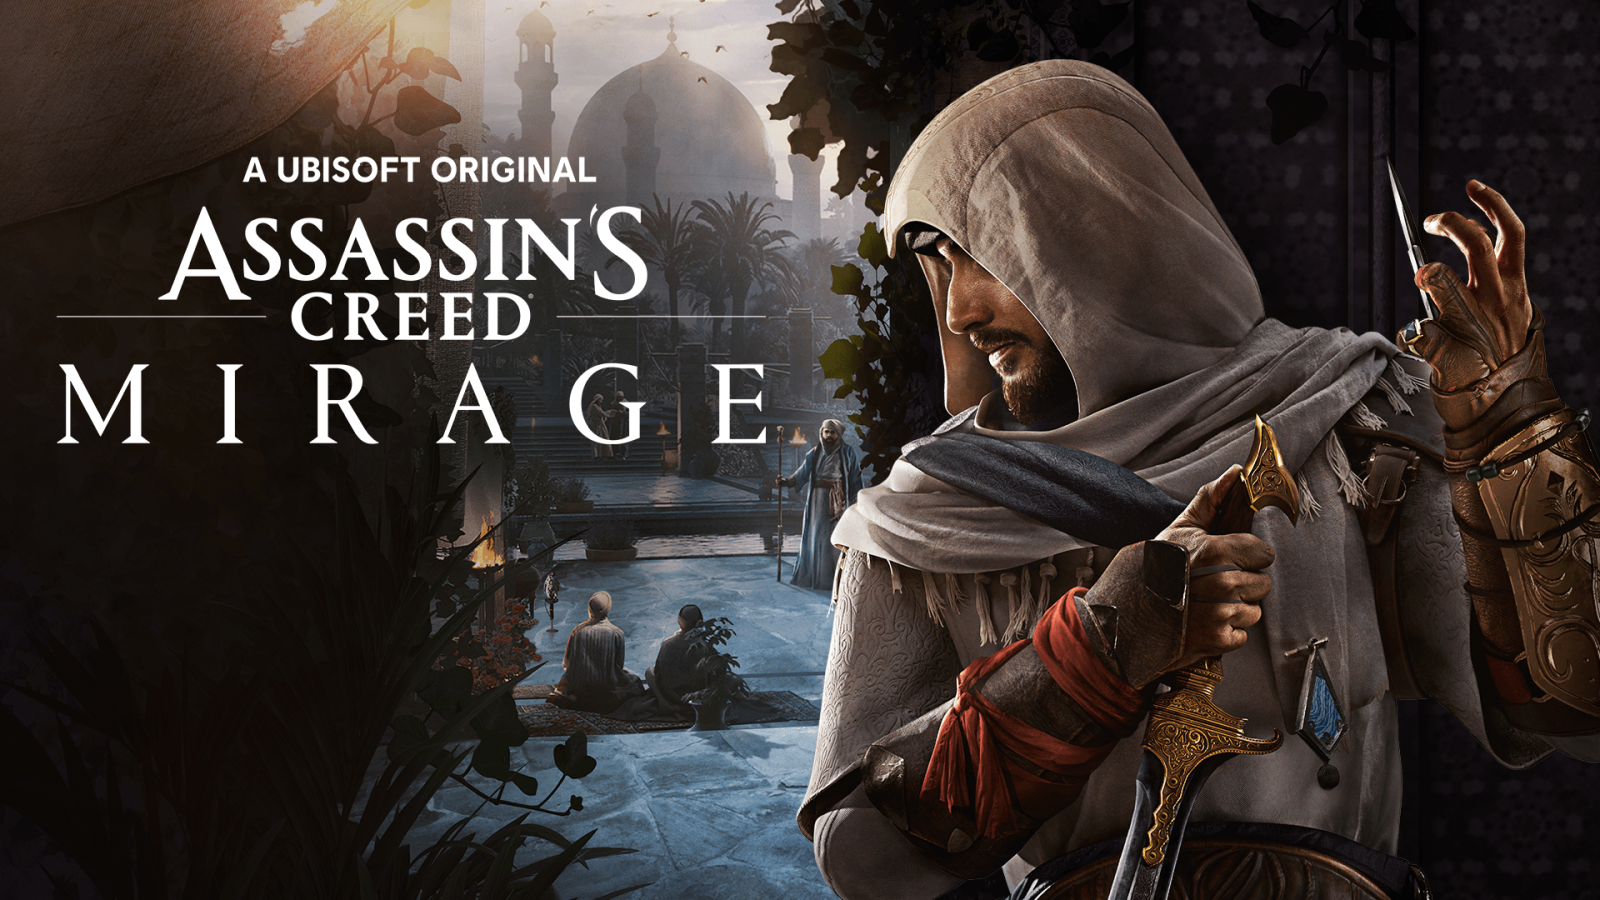 Ubisoft released a new screenshot from Assassin's Creed Mirage with Bassim 